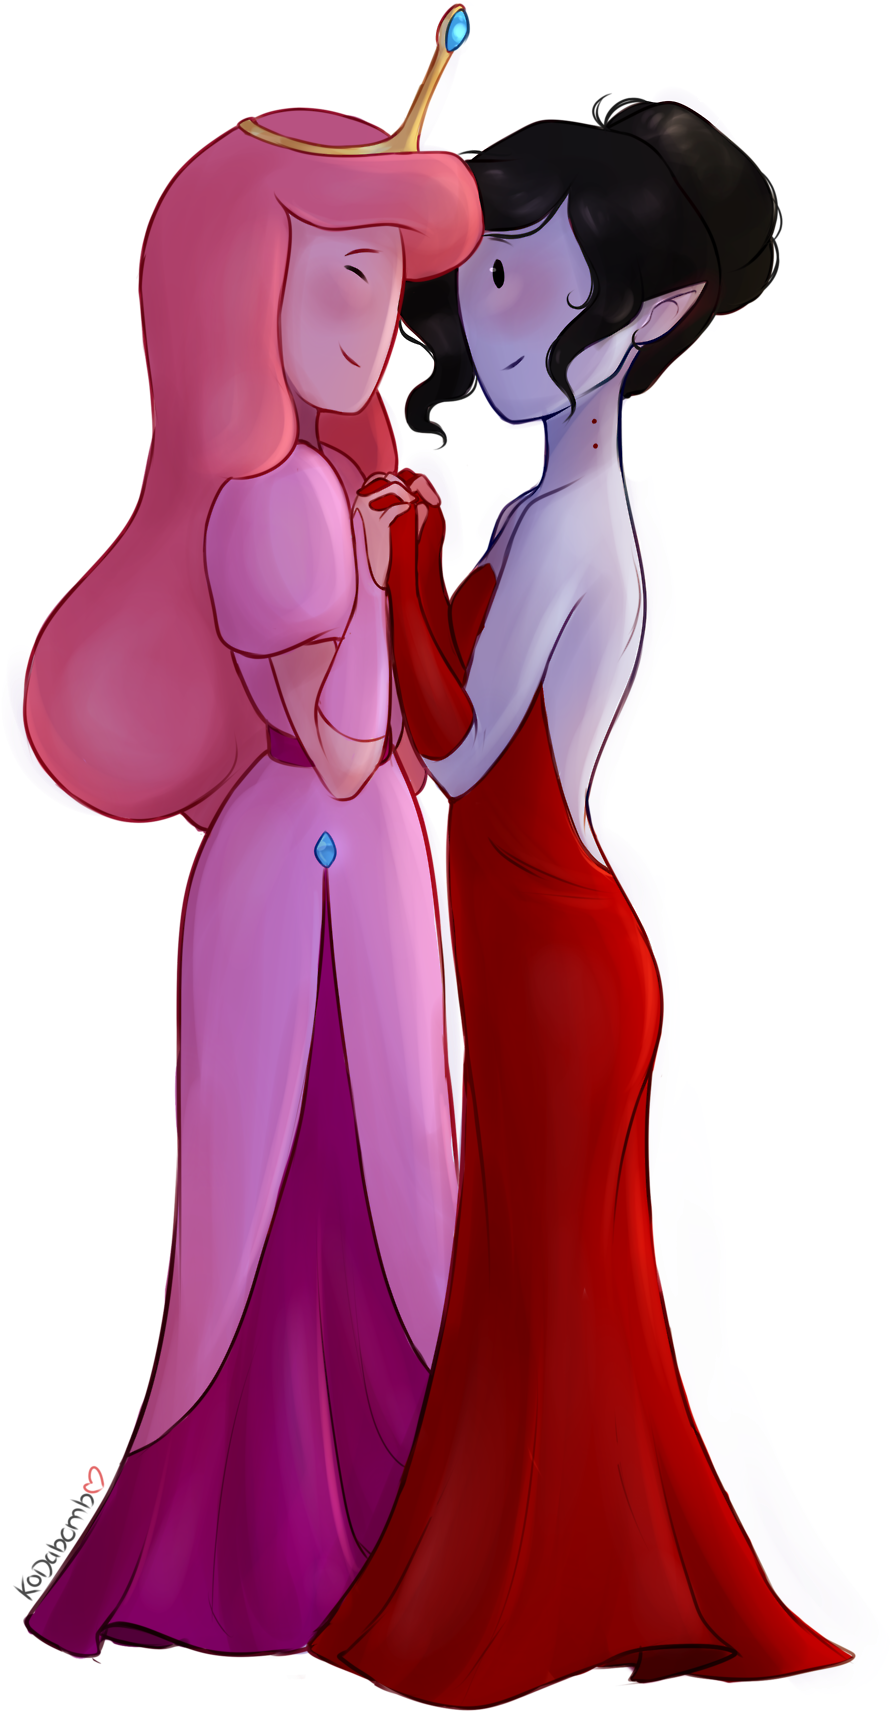 They'd Be Going To Formal Together As Friends Adventure - Princess Bubblegum (1280x1920), Png Download